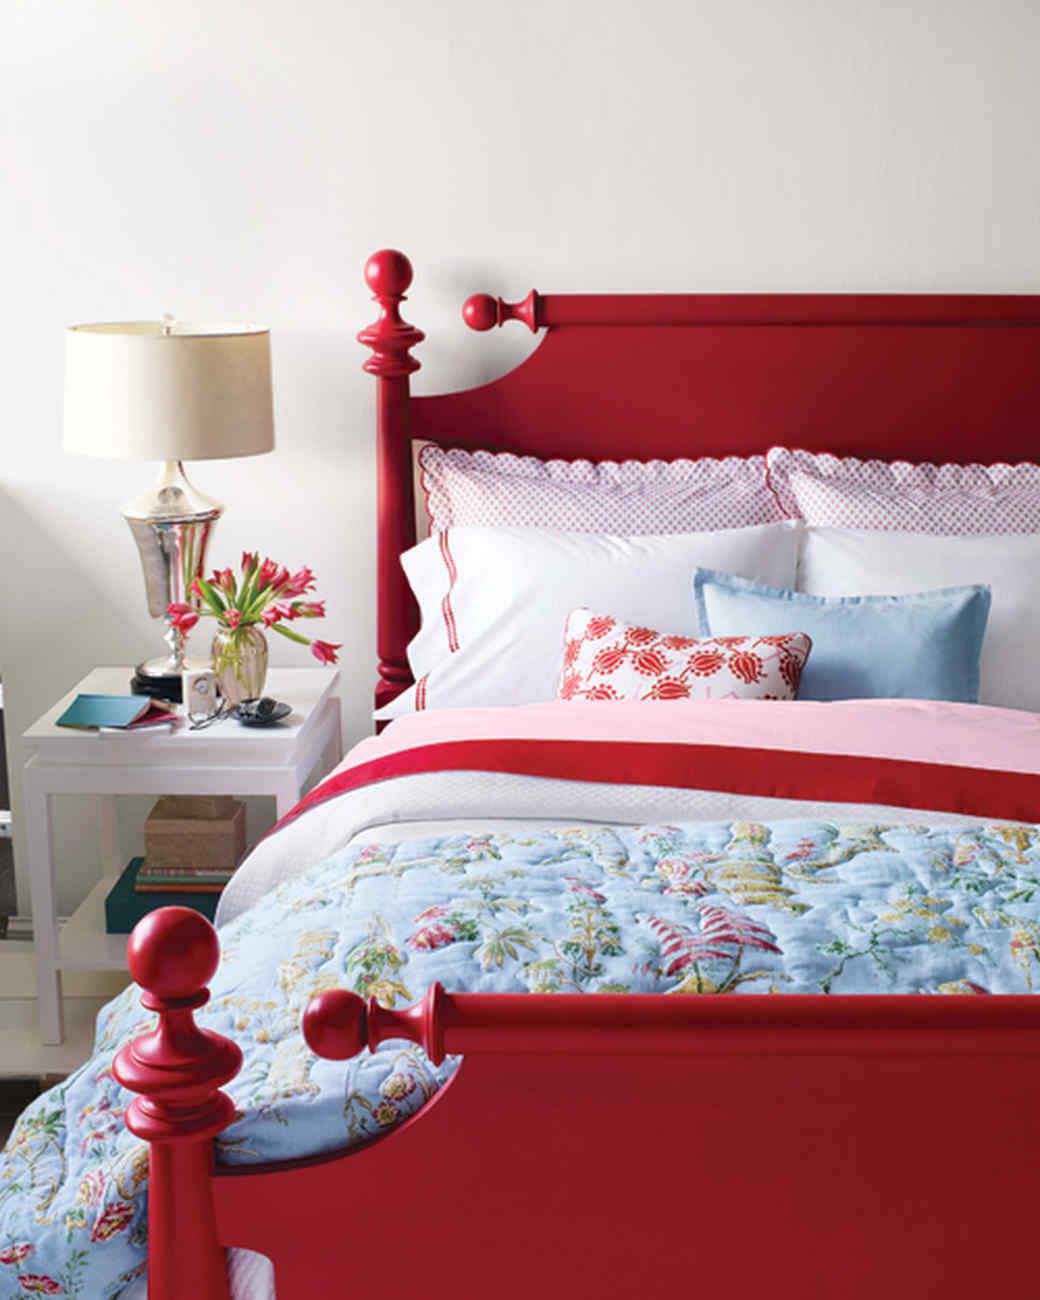 How To Paint A Bed How to Paint a Bed Frame | Martha Stewart